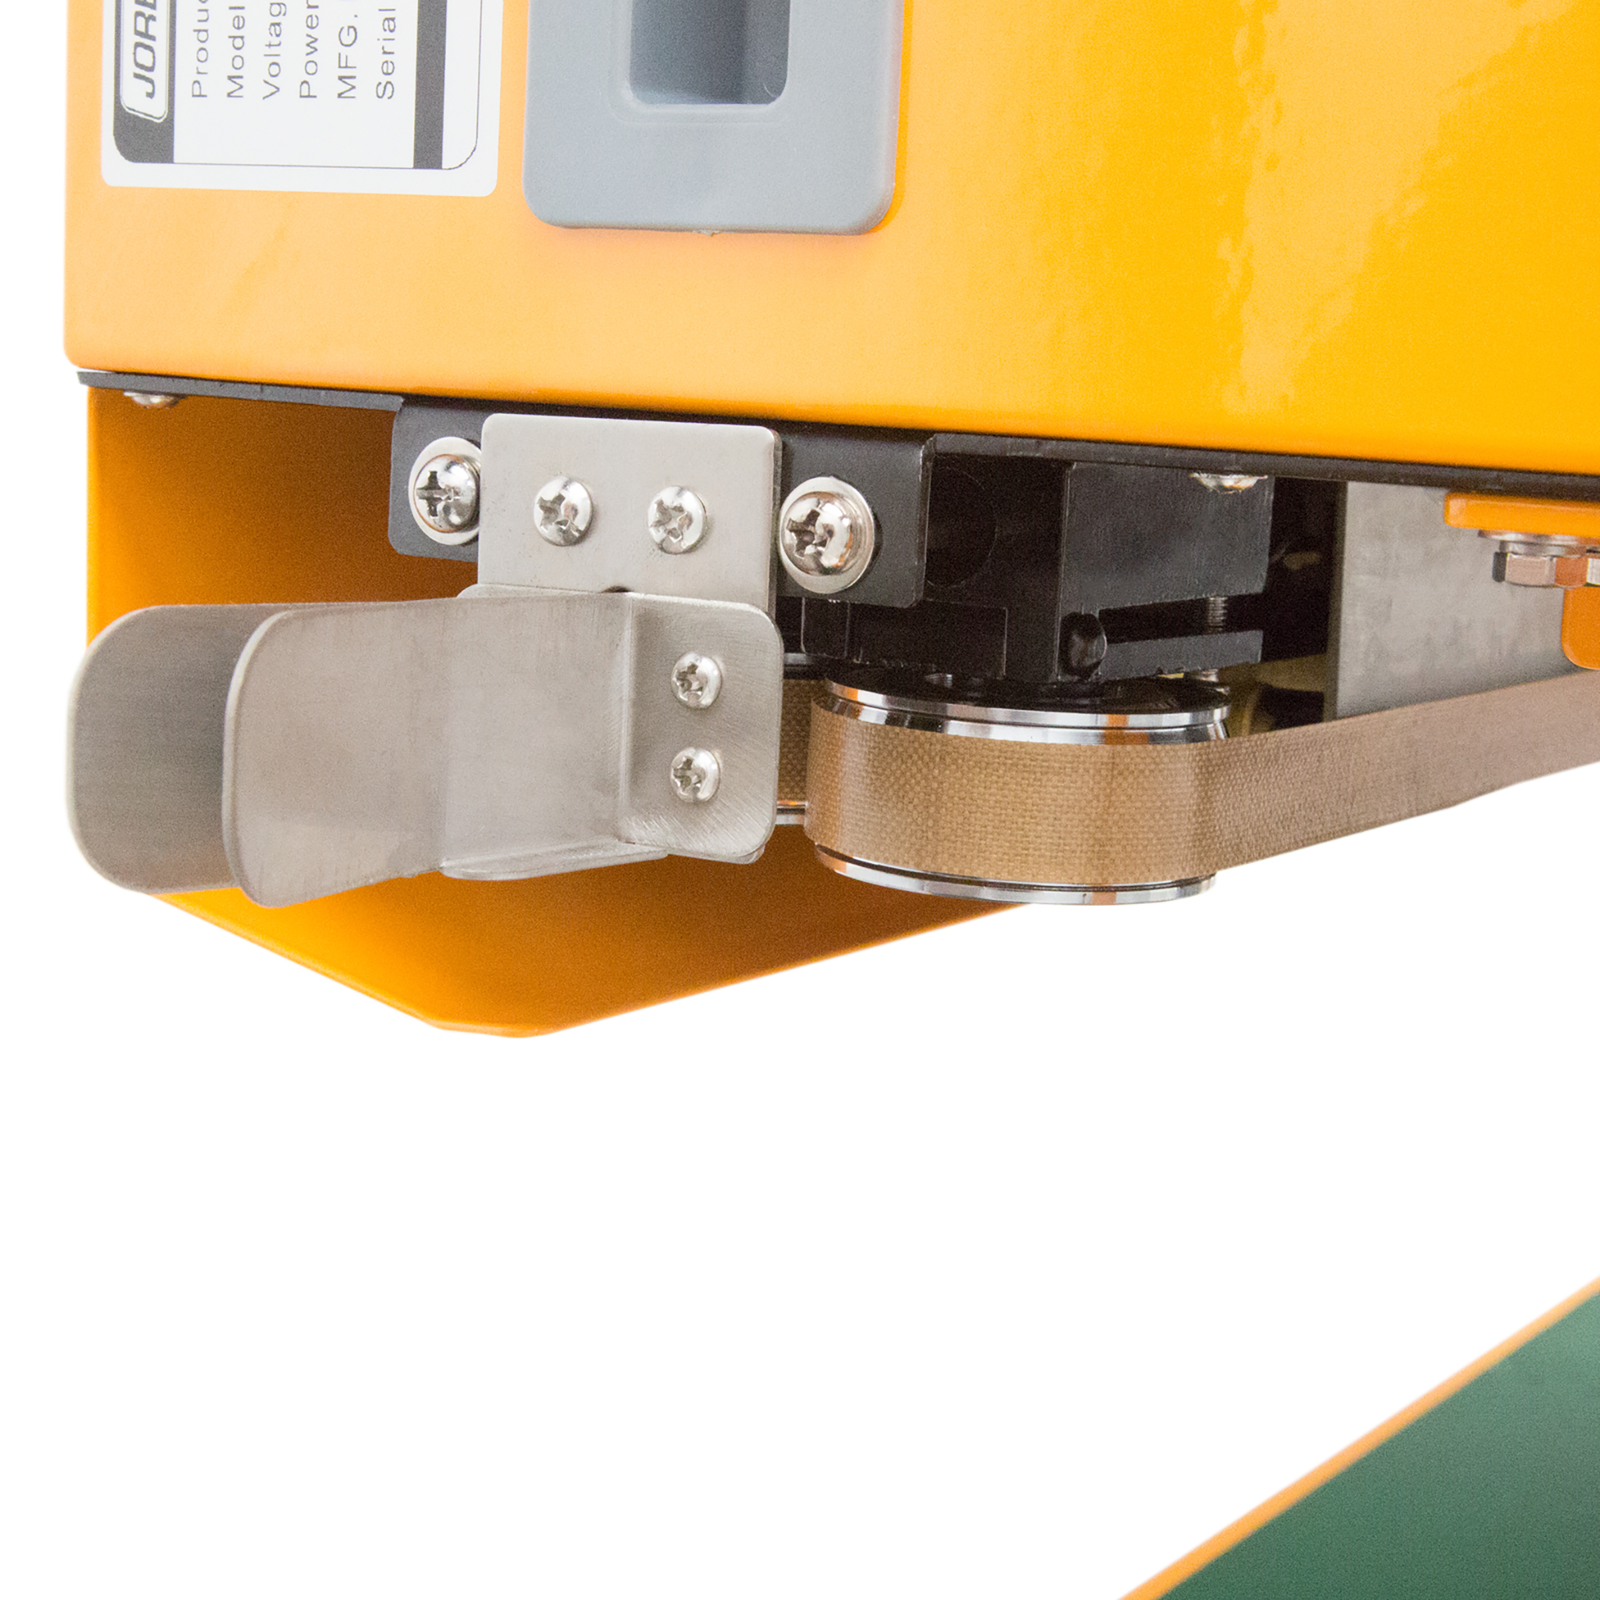 Closeup shows the heating element and the entry track of the JORES TECHNOLOGIES® continuous band bag sealer.